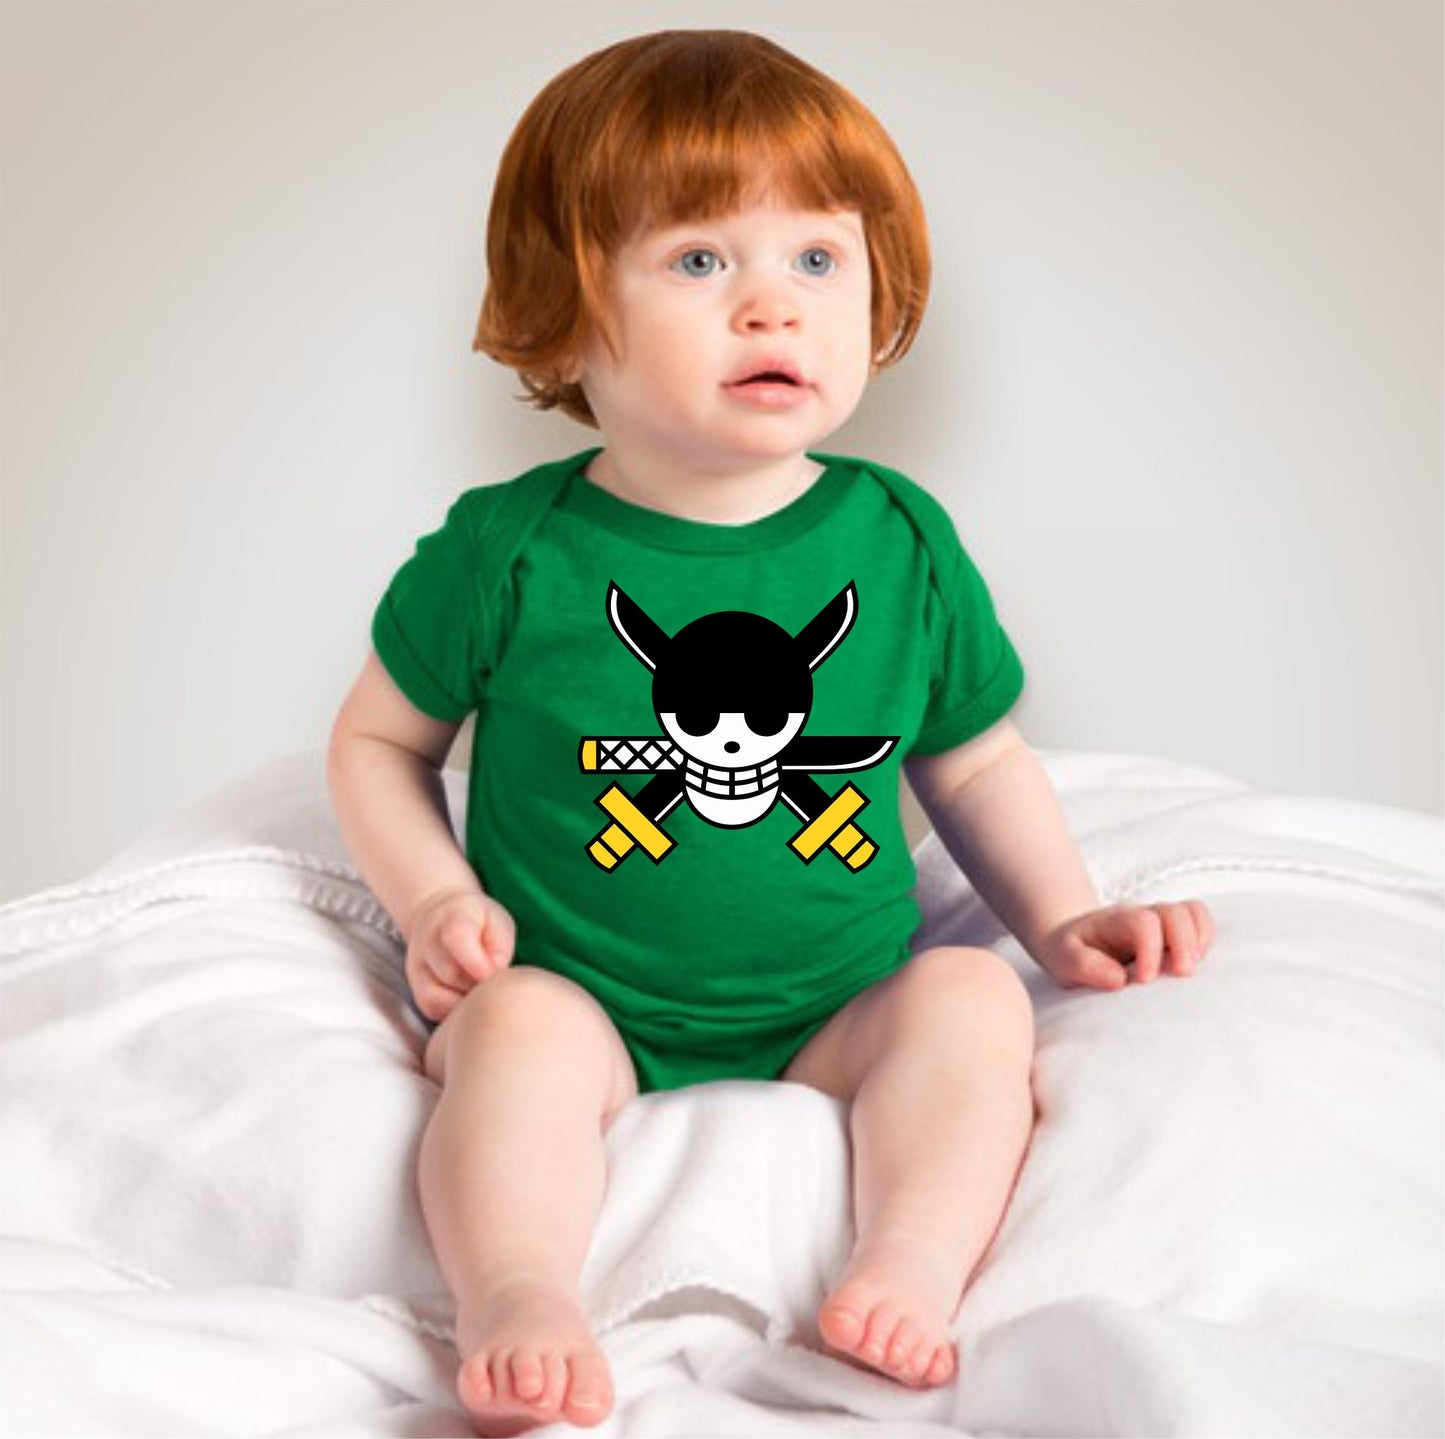 Baby Character Onesies - Jolly Roger One Piece Zorro